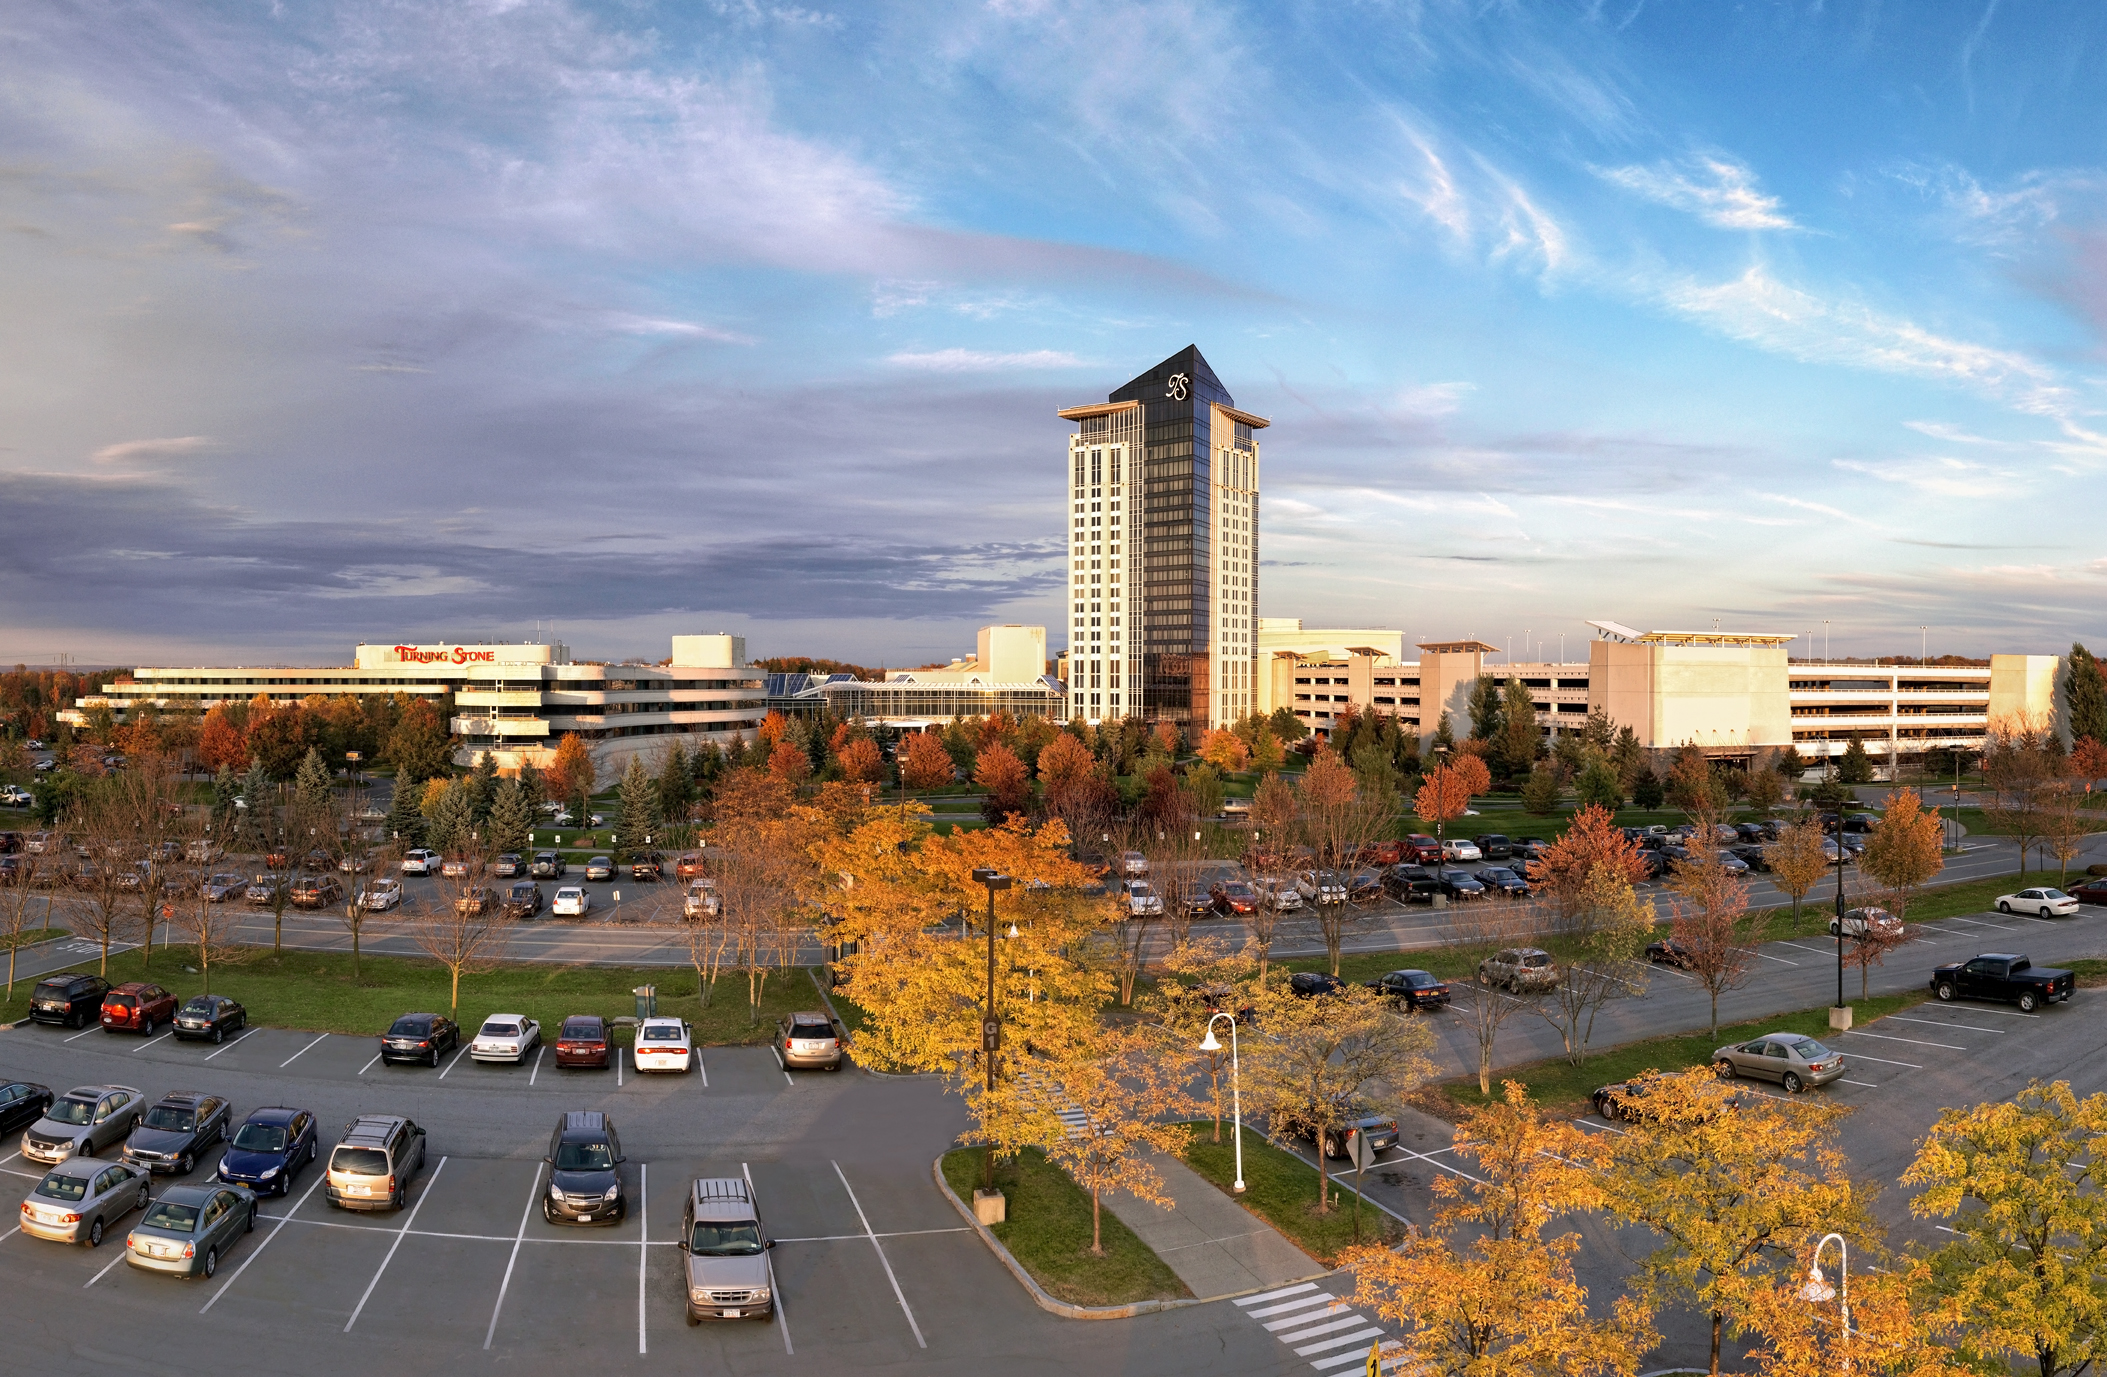 Panoramic shot of Turning Stone Resort Casino exterior with leaves changing colors in the fall